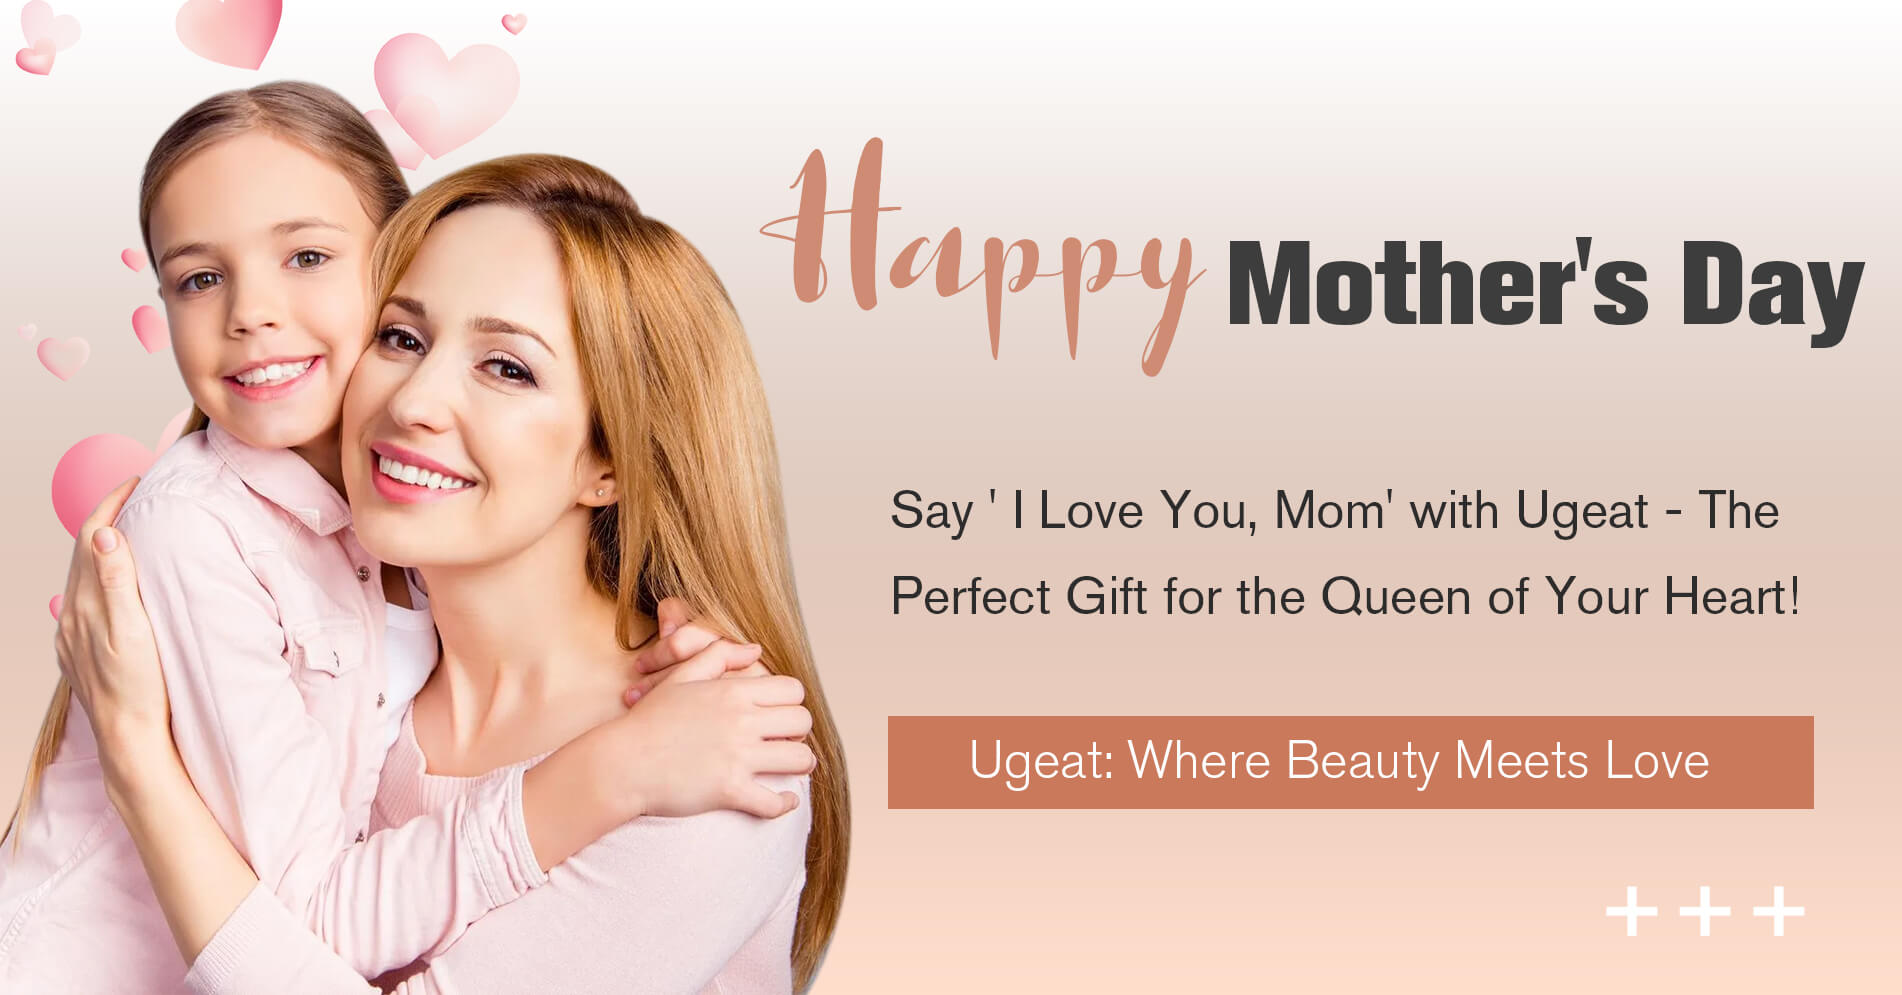 ugeat hair extensions for mother's day